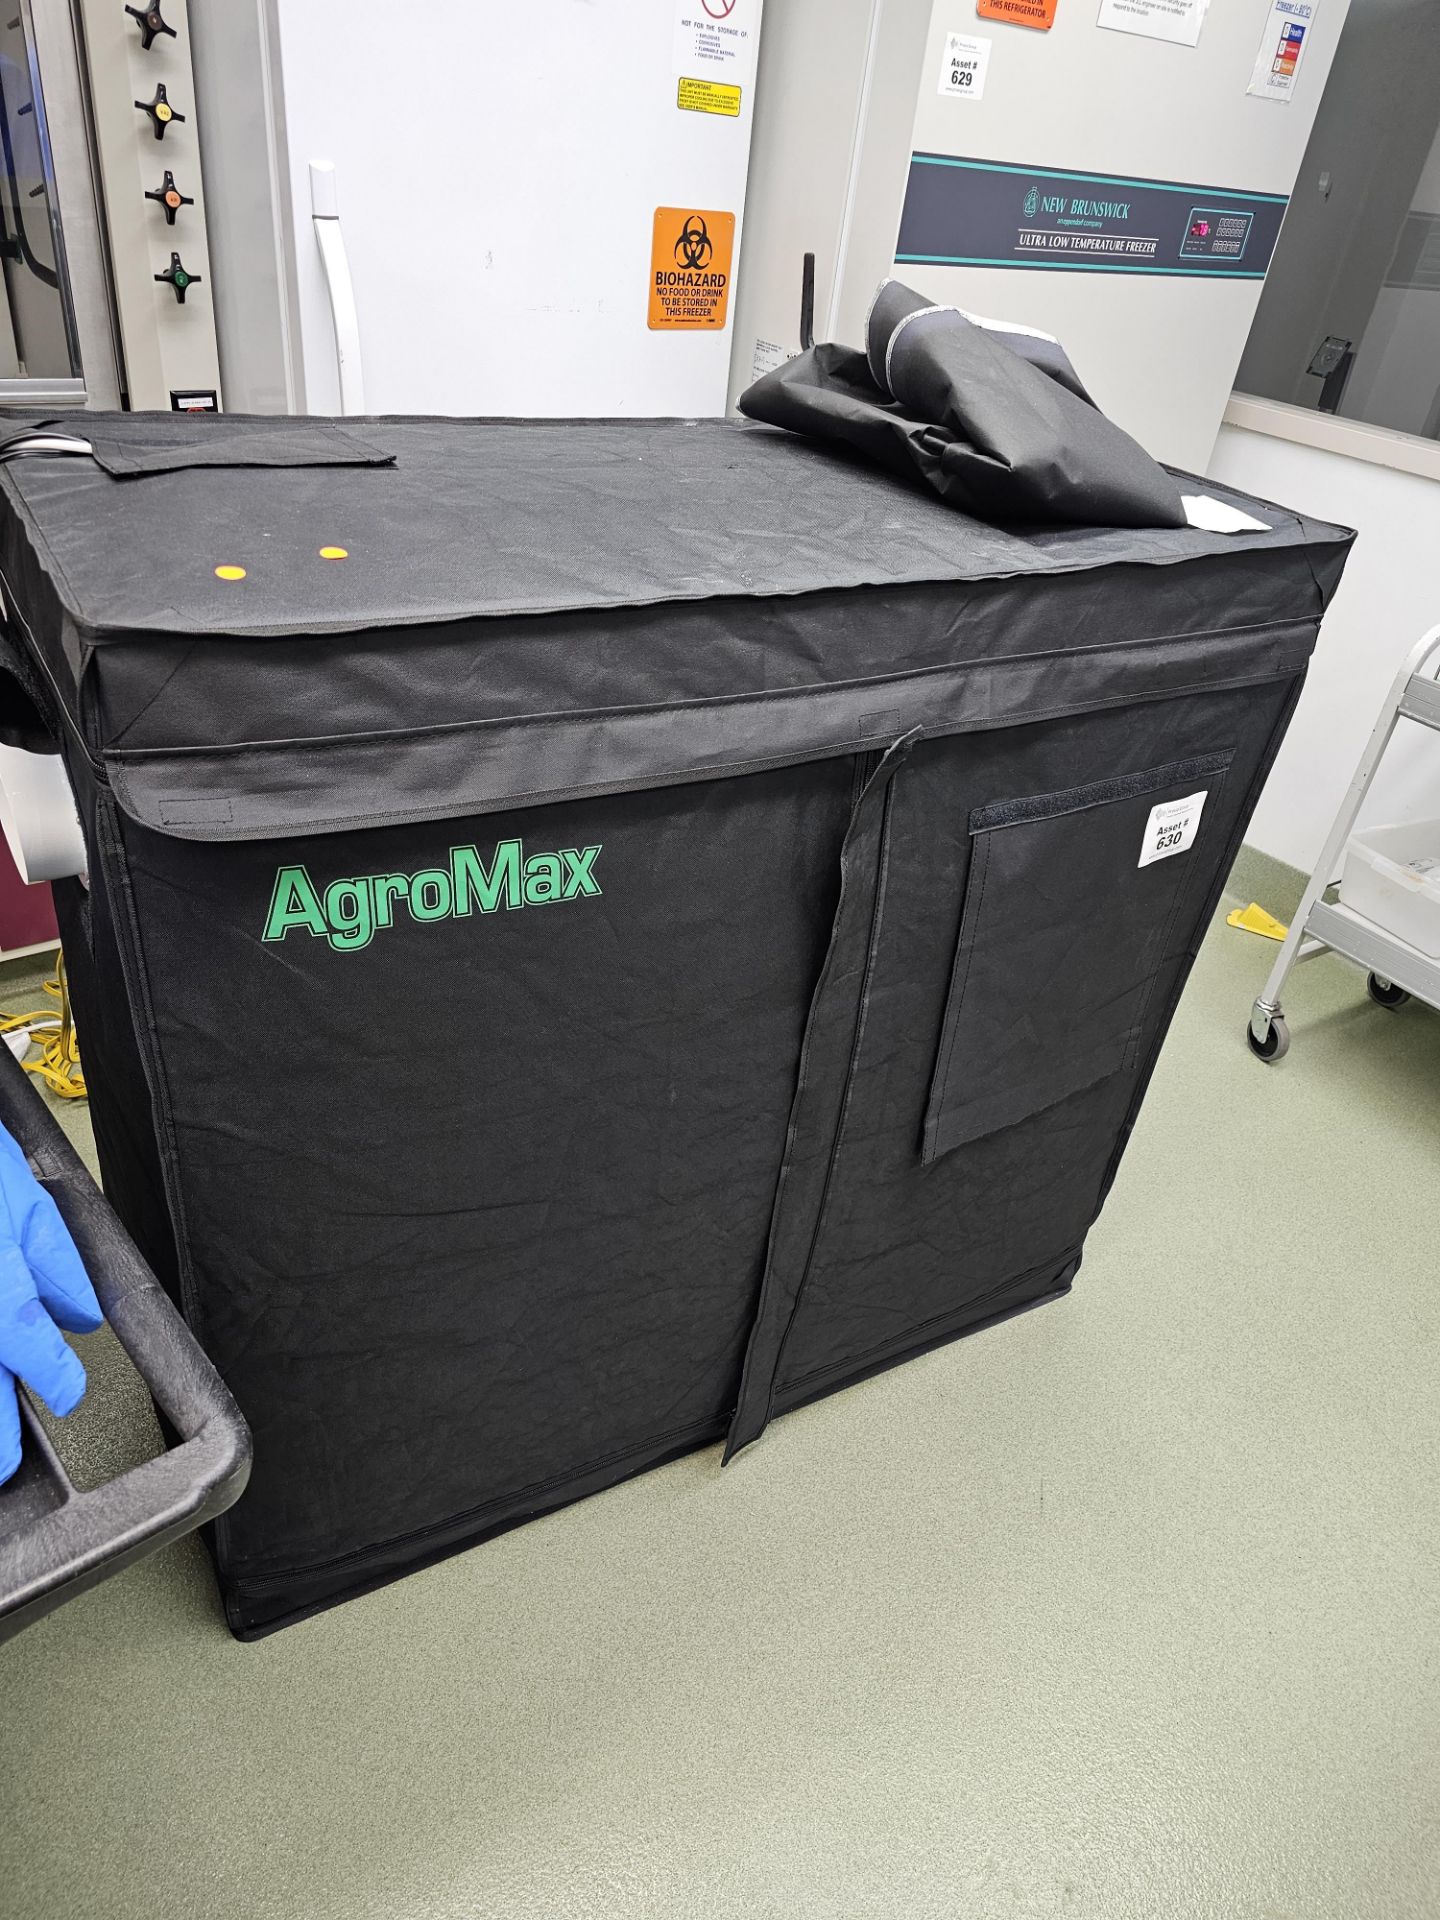 Agromax - Image 2 of 5